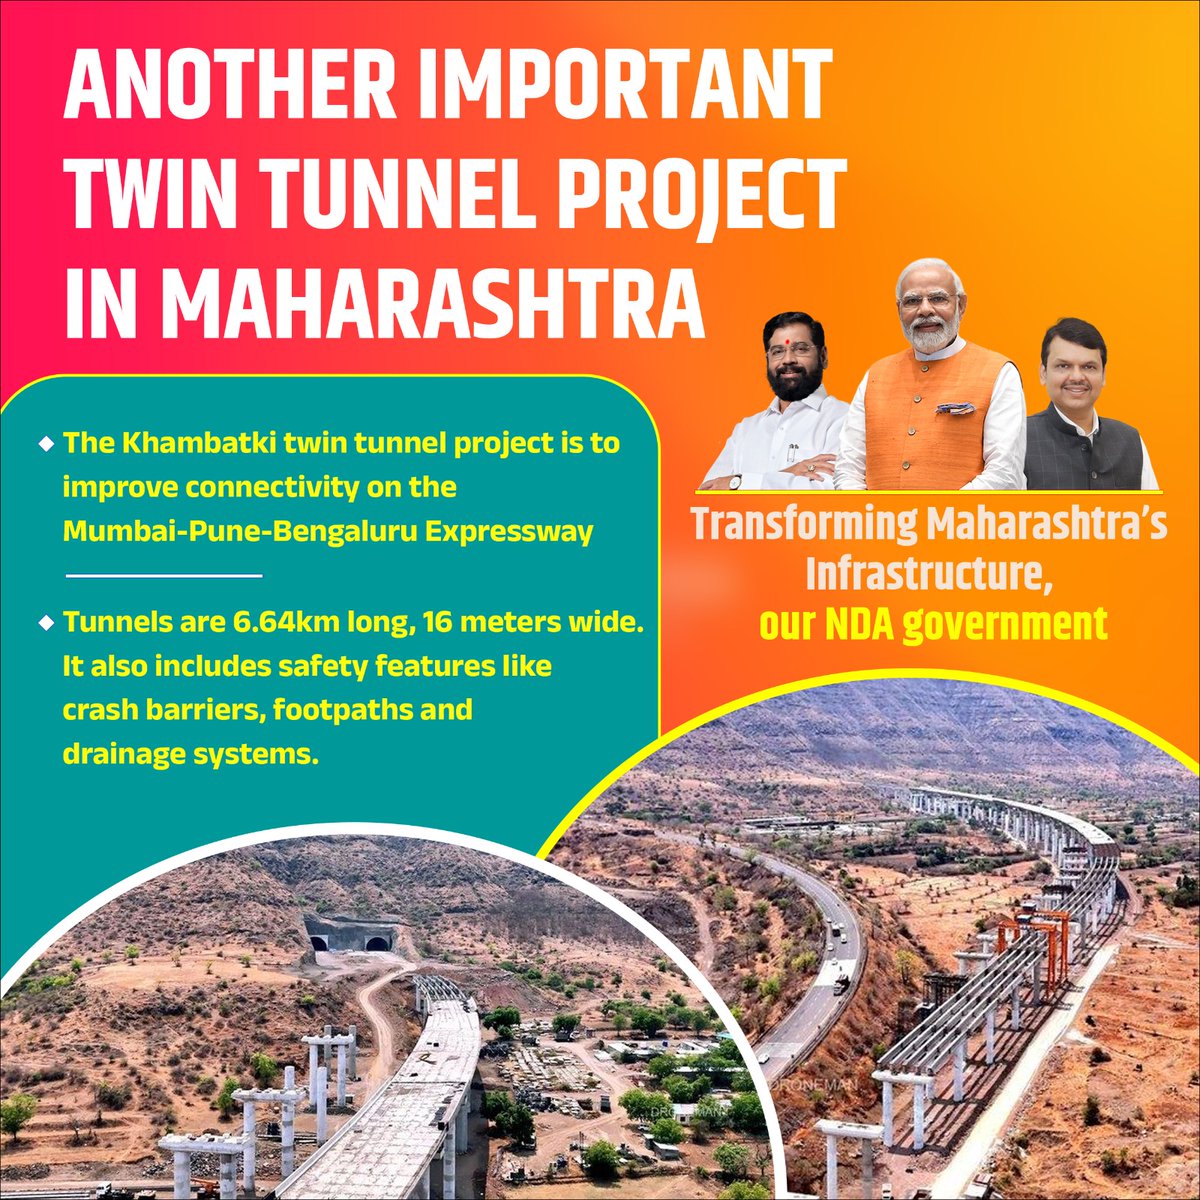 The Khambatki twin tunnel project on the Mumbai-Pune-Bengaluru Expressway underscores the government's commitment to improving connectivity and ensuring passenger safety.